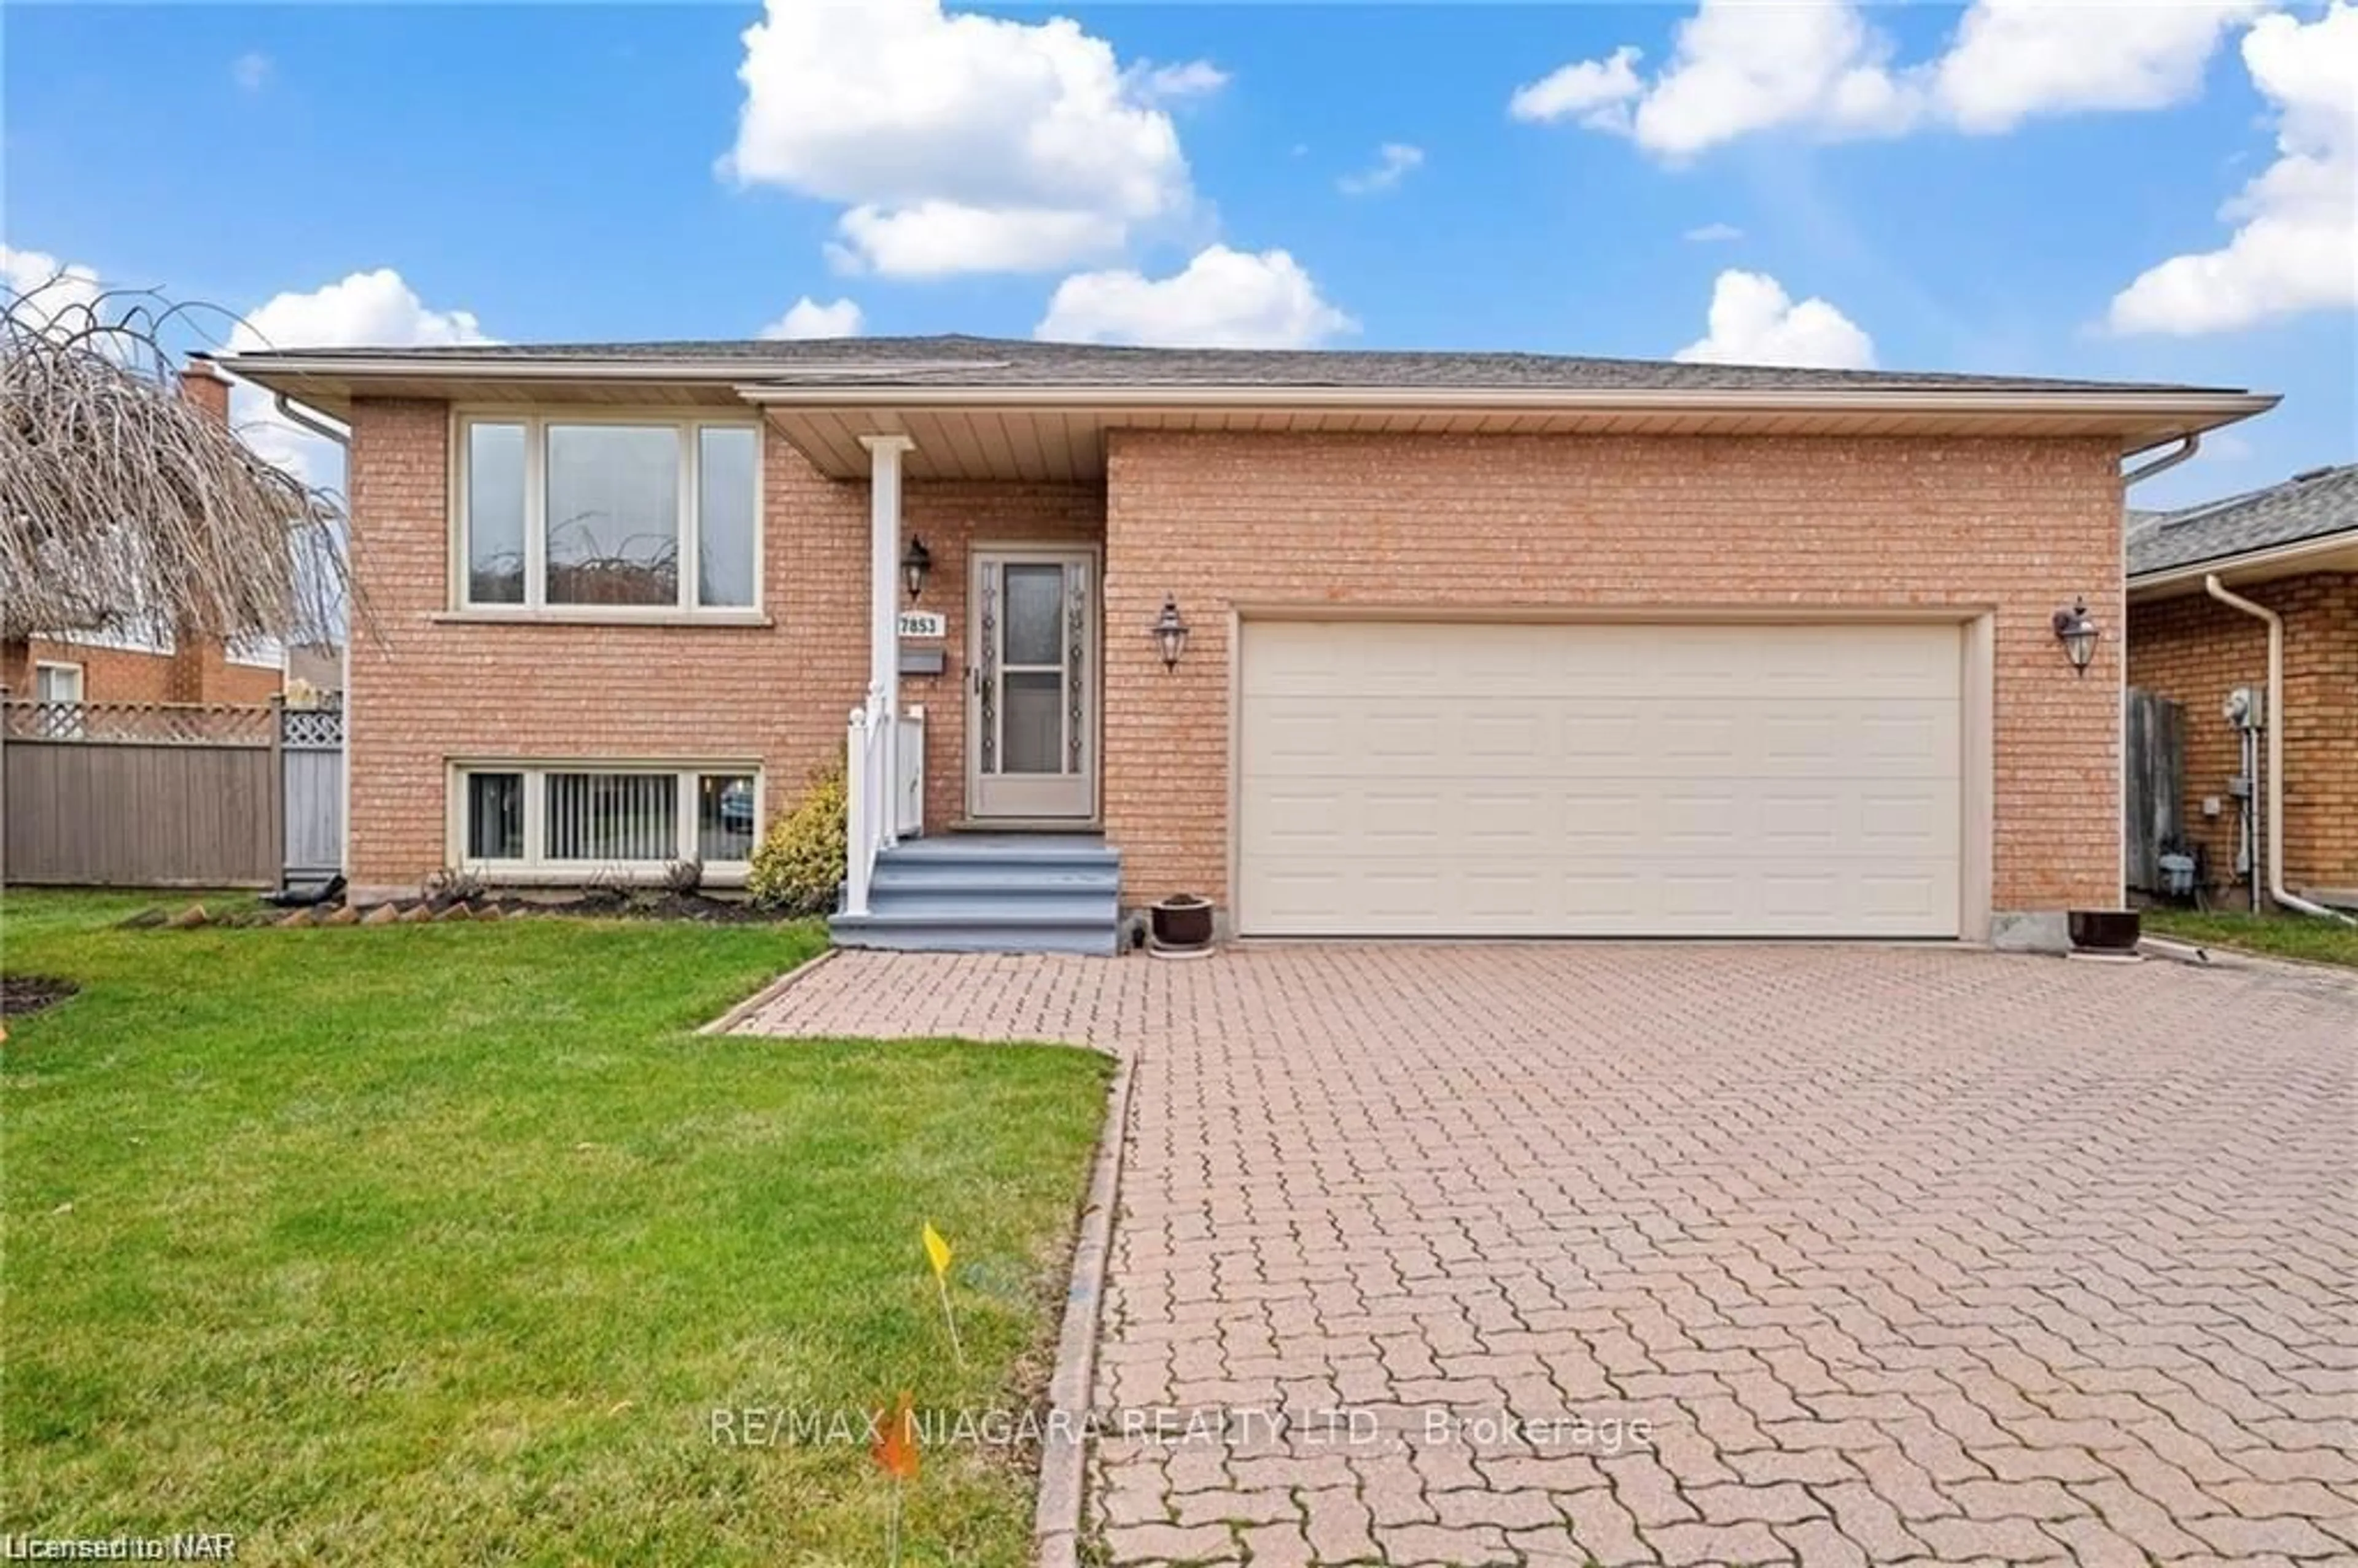 Home with brick exterior material for 7853 Alfred St, Niagara Falls Ontario L2H 2W8